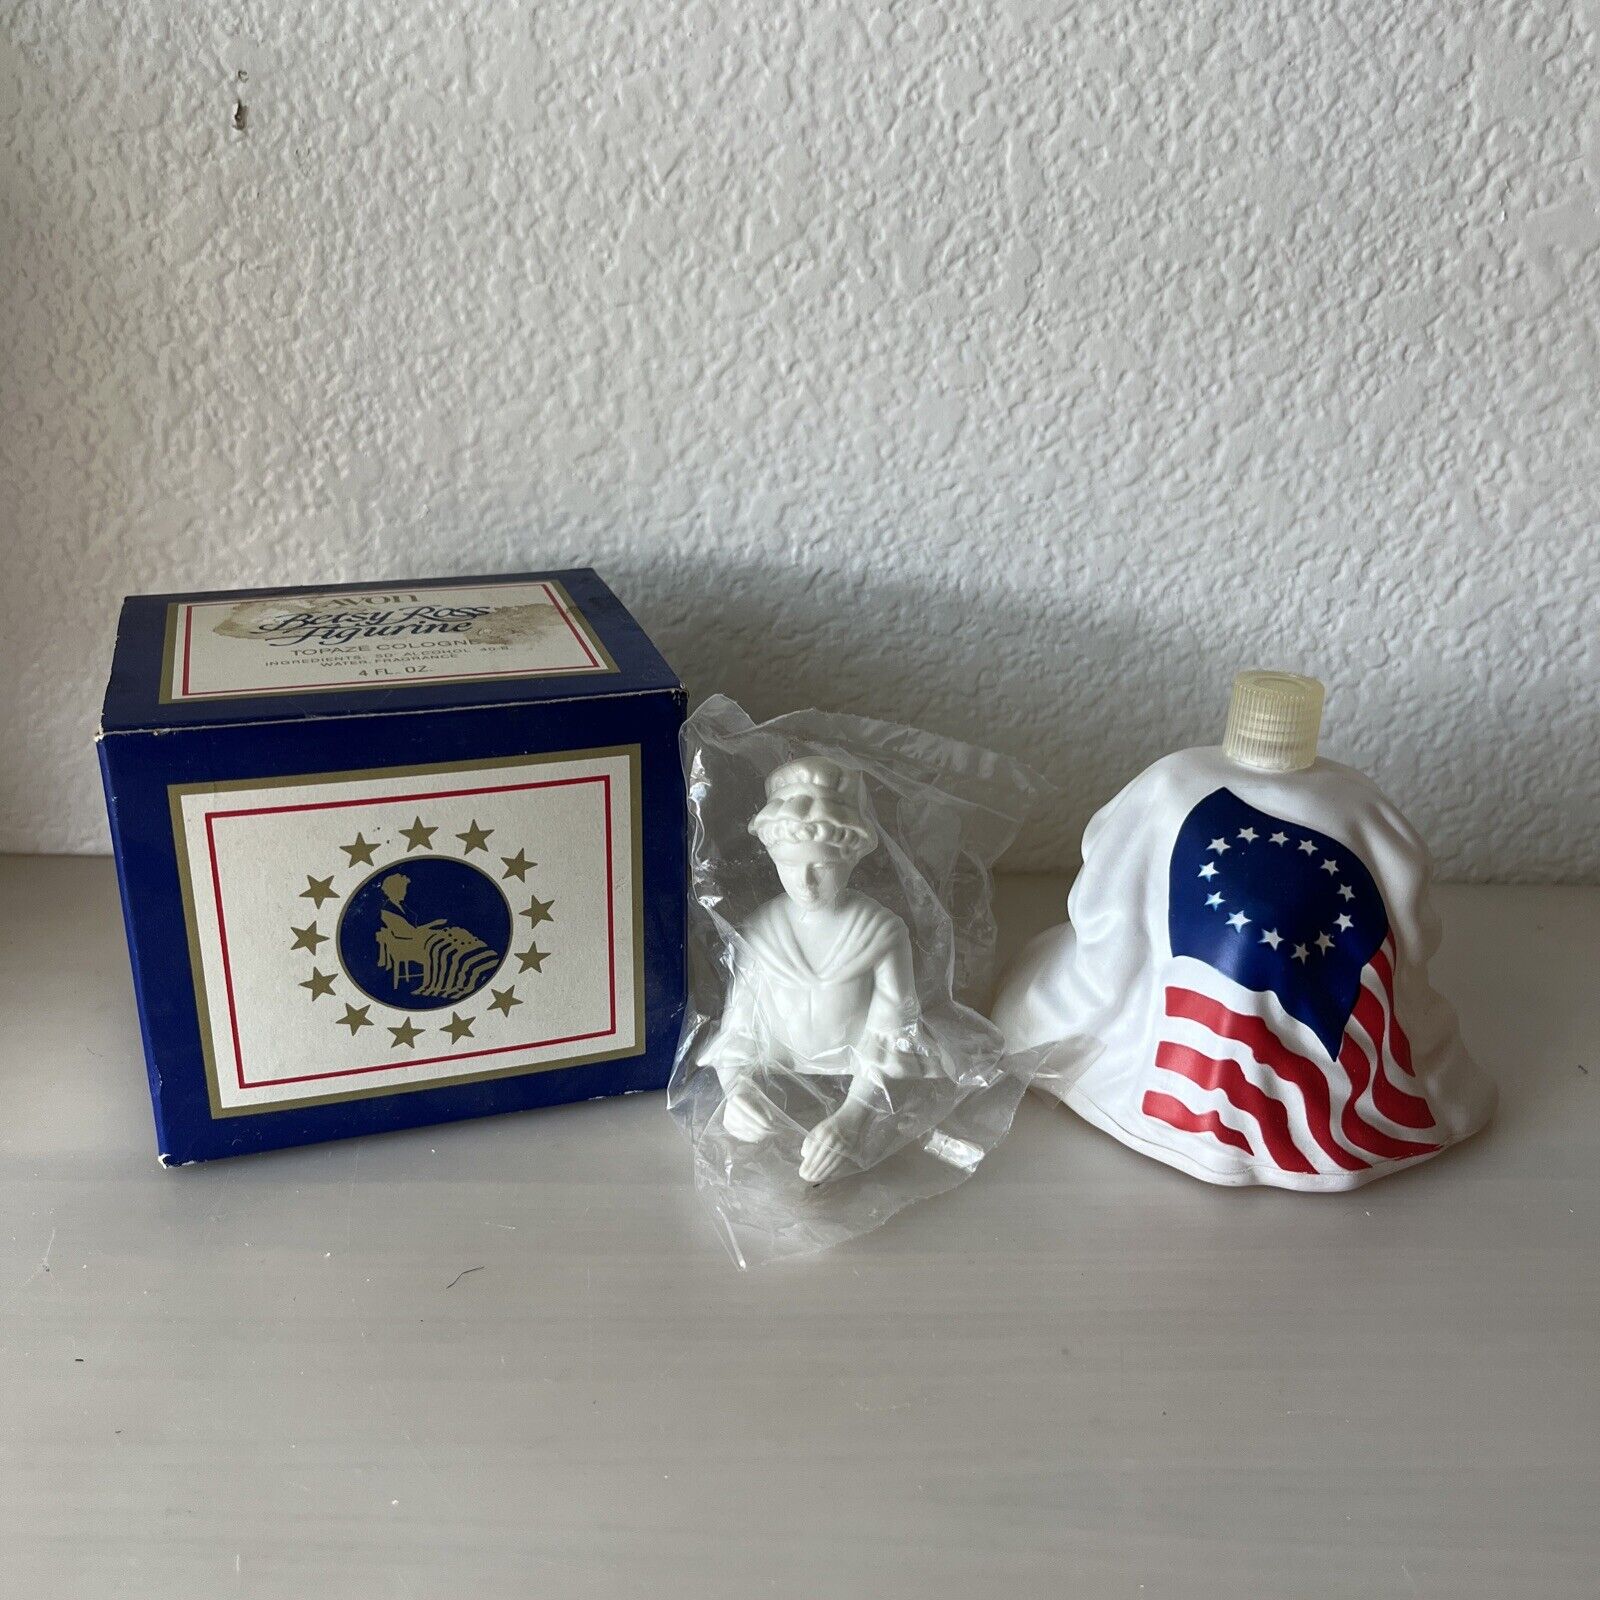 Vintage New Avon Betsy Ross Figurine Sonnet Cologne in box 4 oz 1976 Collectible